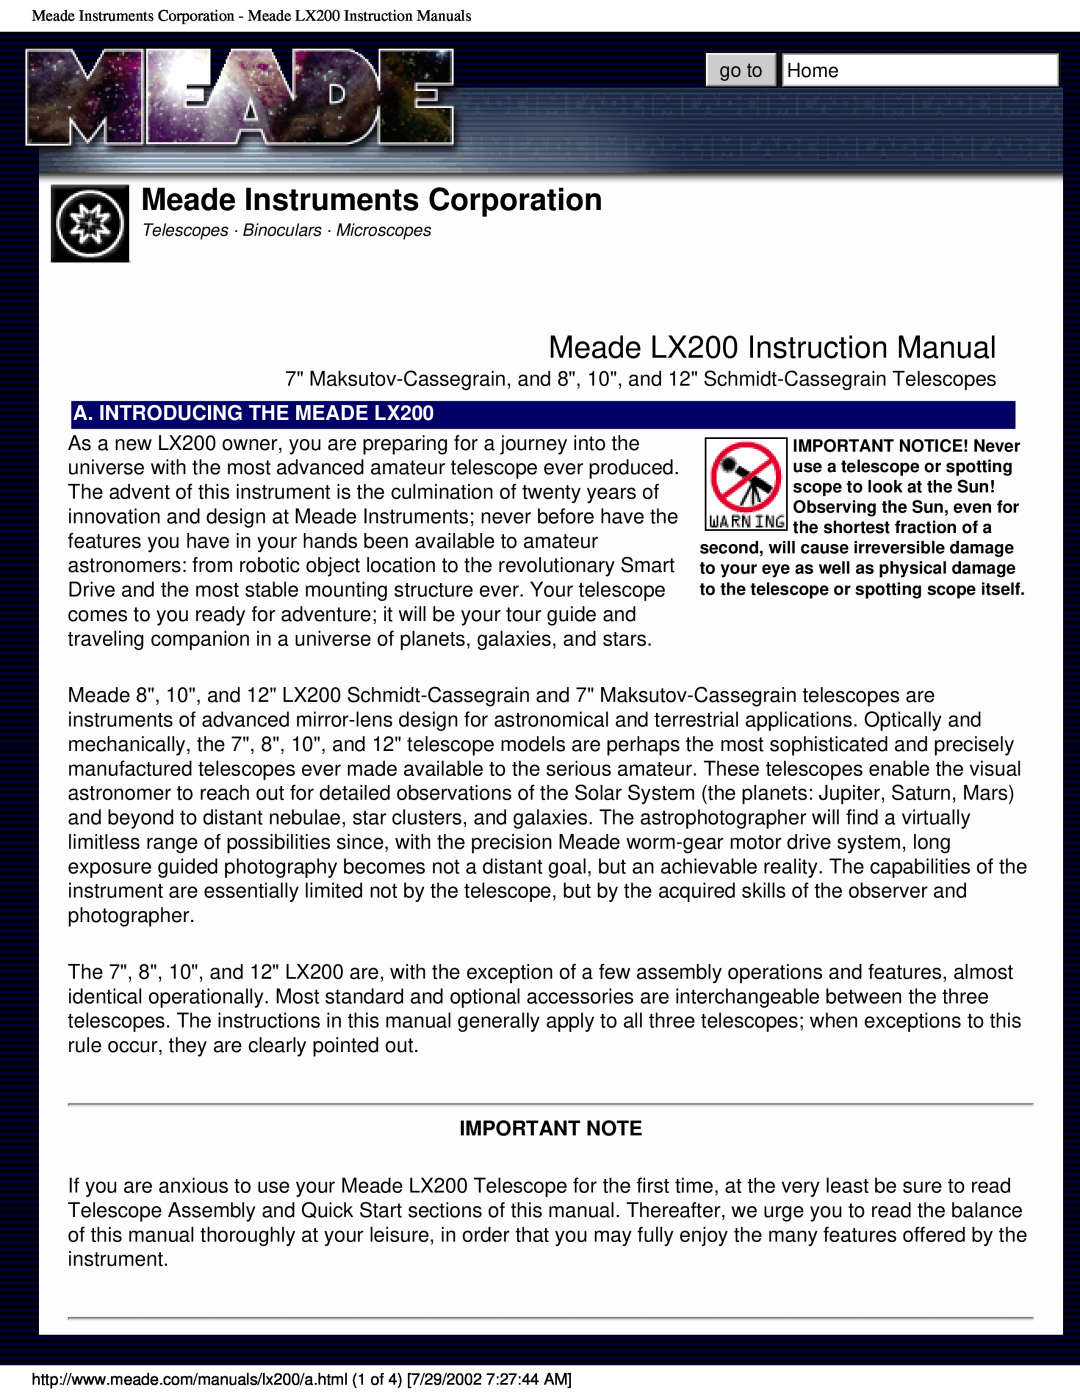 Meade Meade Instruments Corporation, Meade LX200 Instruction Manual, A. INTRODUCING THE MEADE LX200, Important Note 